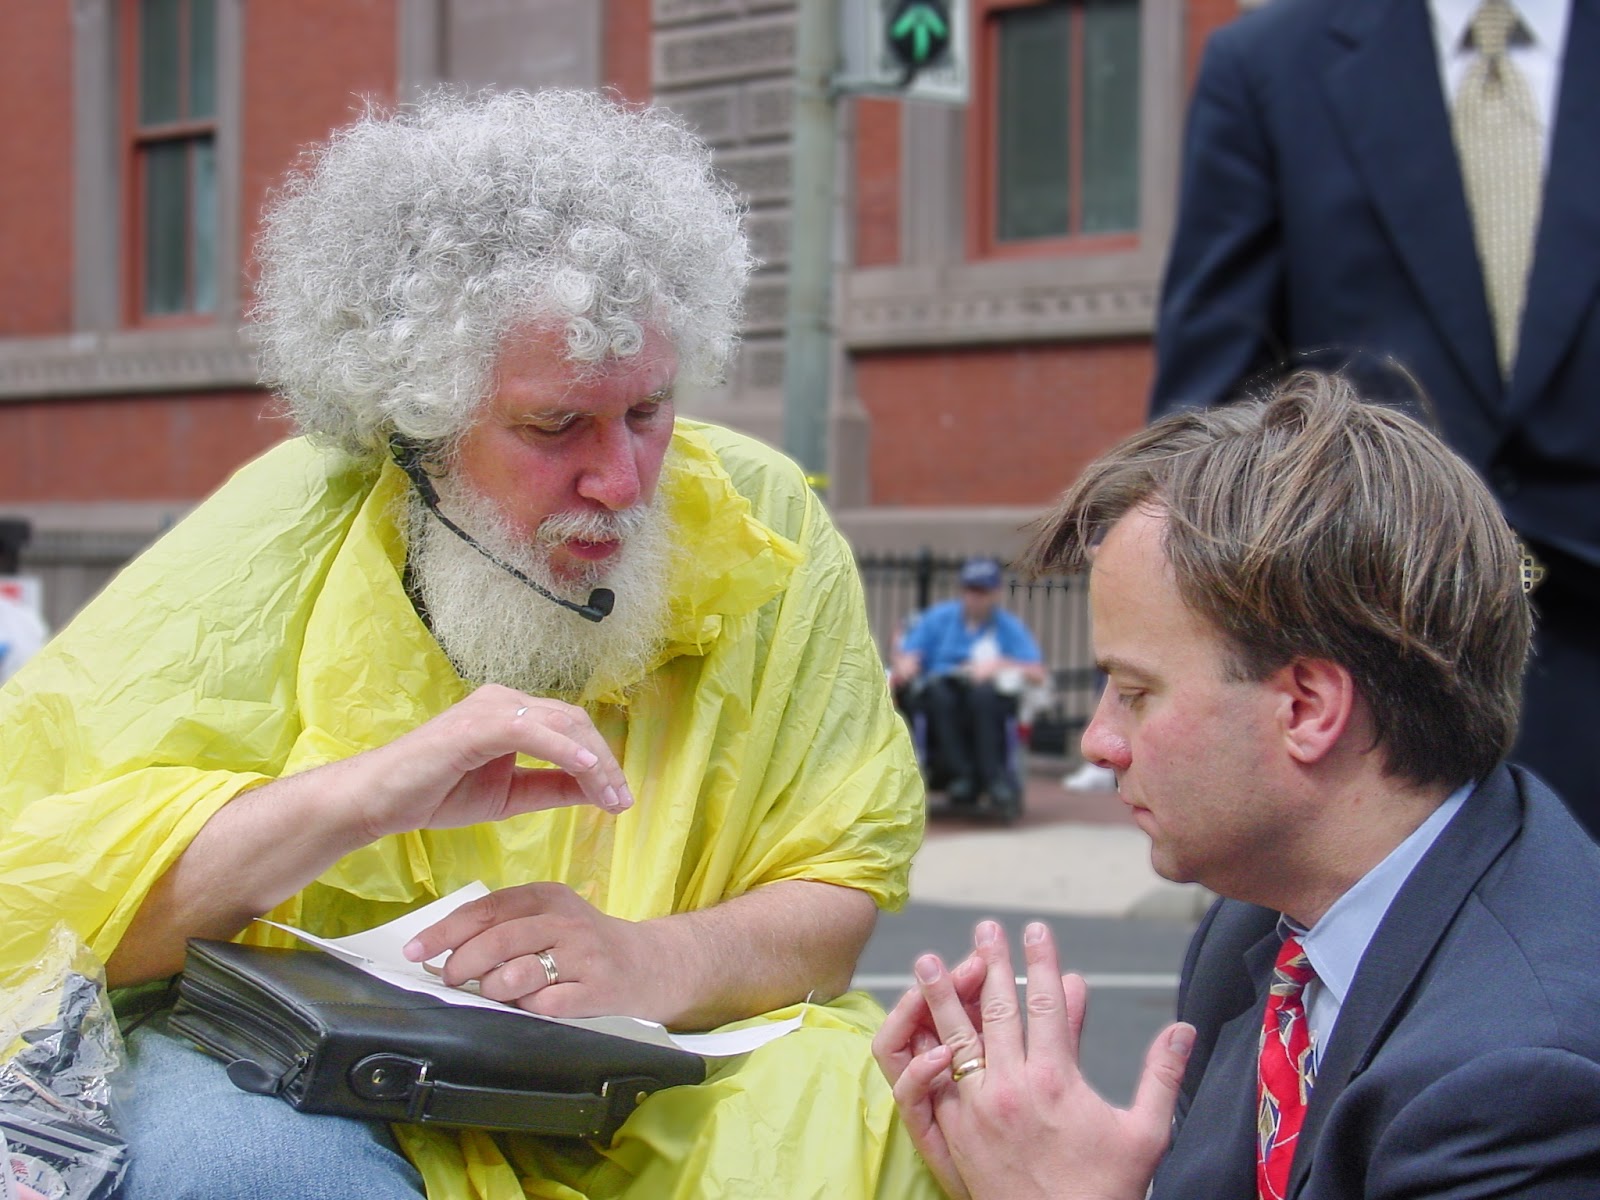 Man with white hair and beard in a yellow rain poncho speaks with a young man in a blue suit.